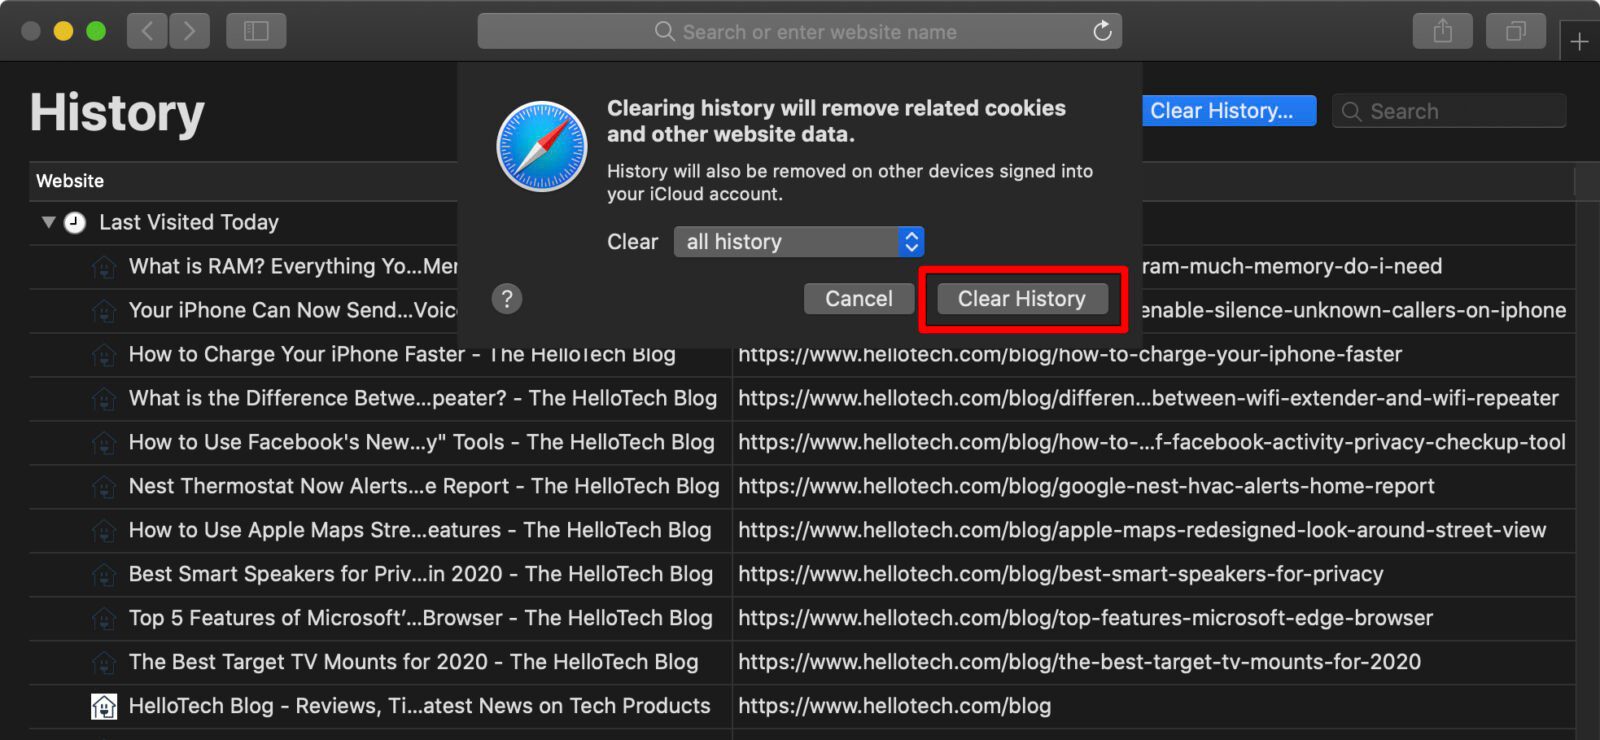 How To Clear History On Safari